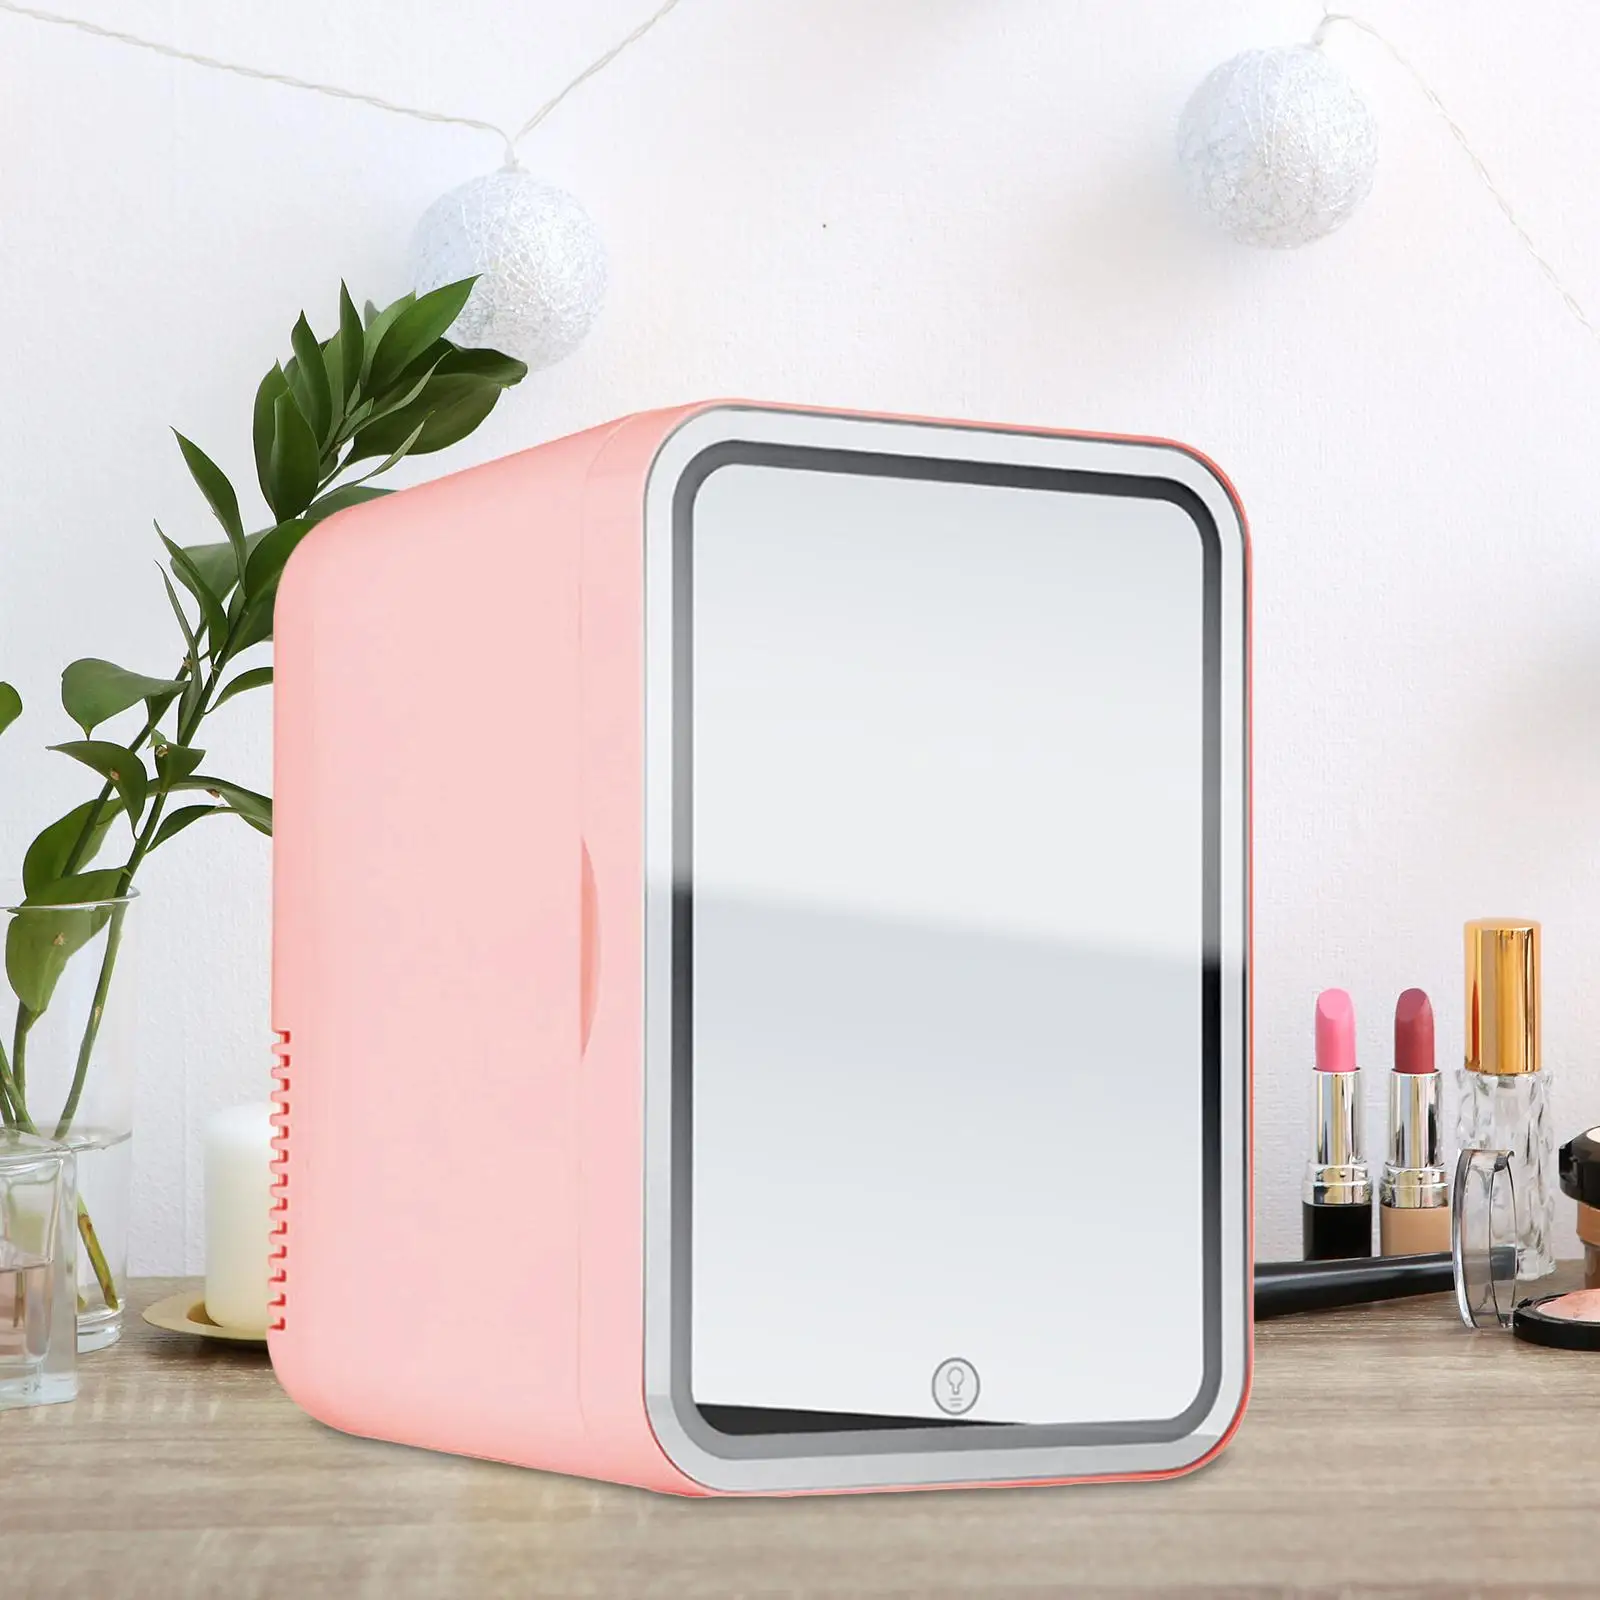 

Small Skincare Fridge with LED Makeup Mirror for Skincare Personal Mirrored Beauty Refrigerator for Makeup College Car Home Dorm